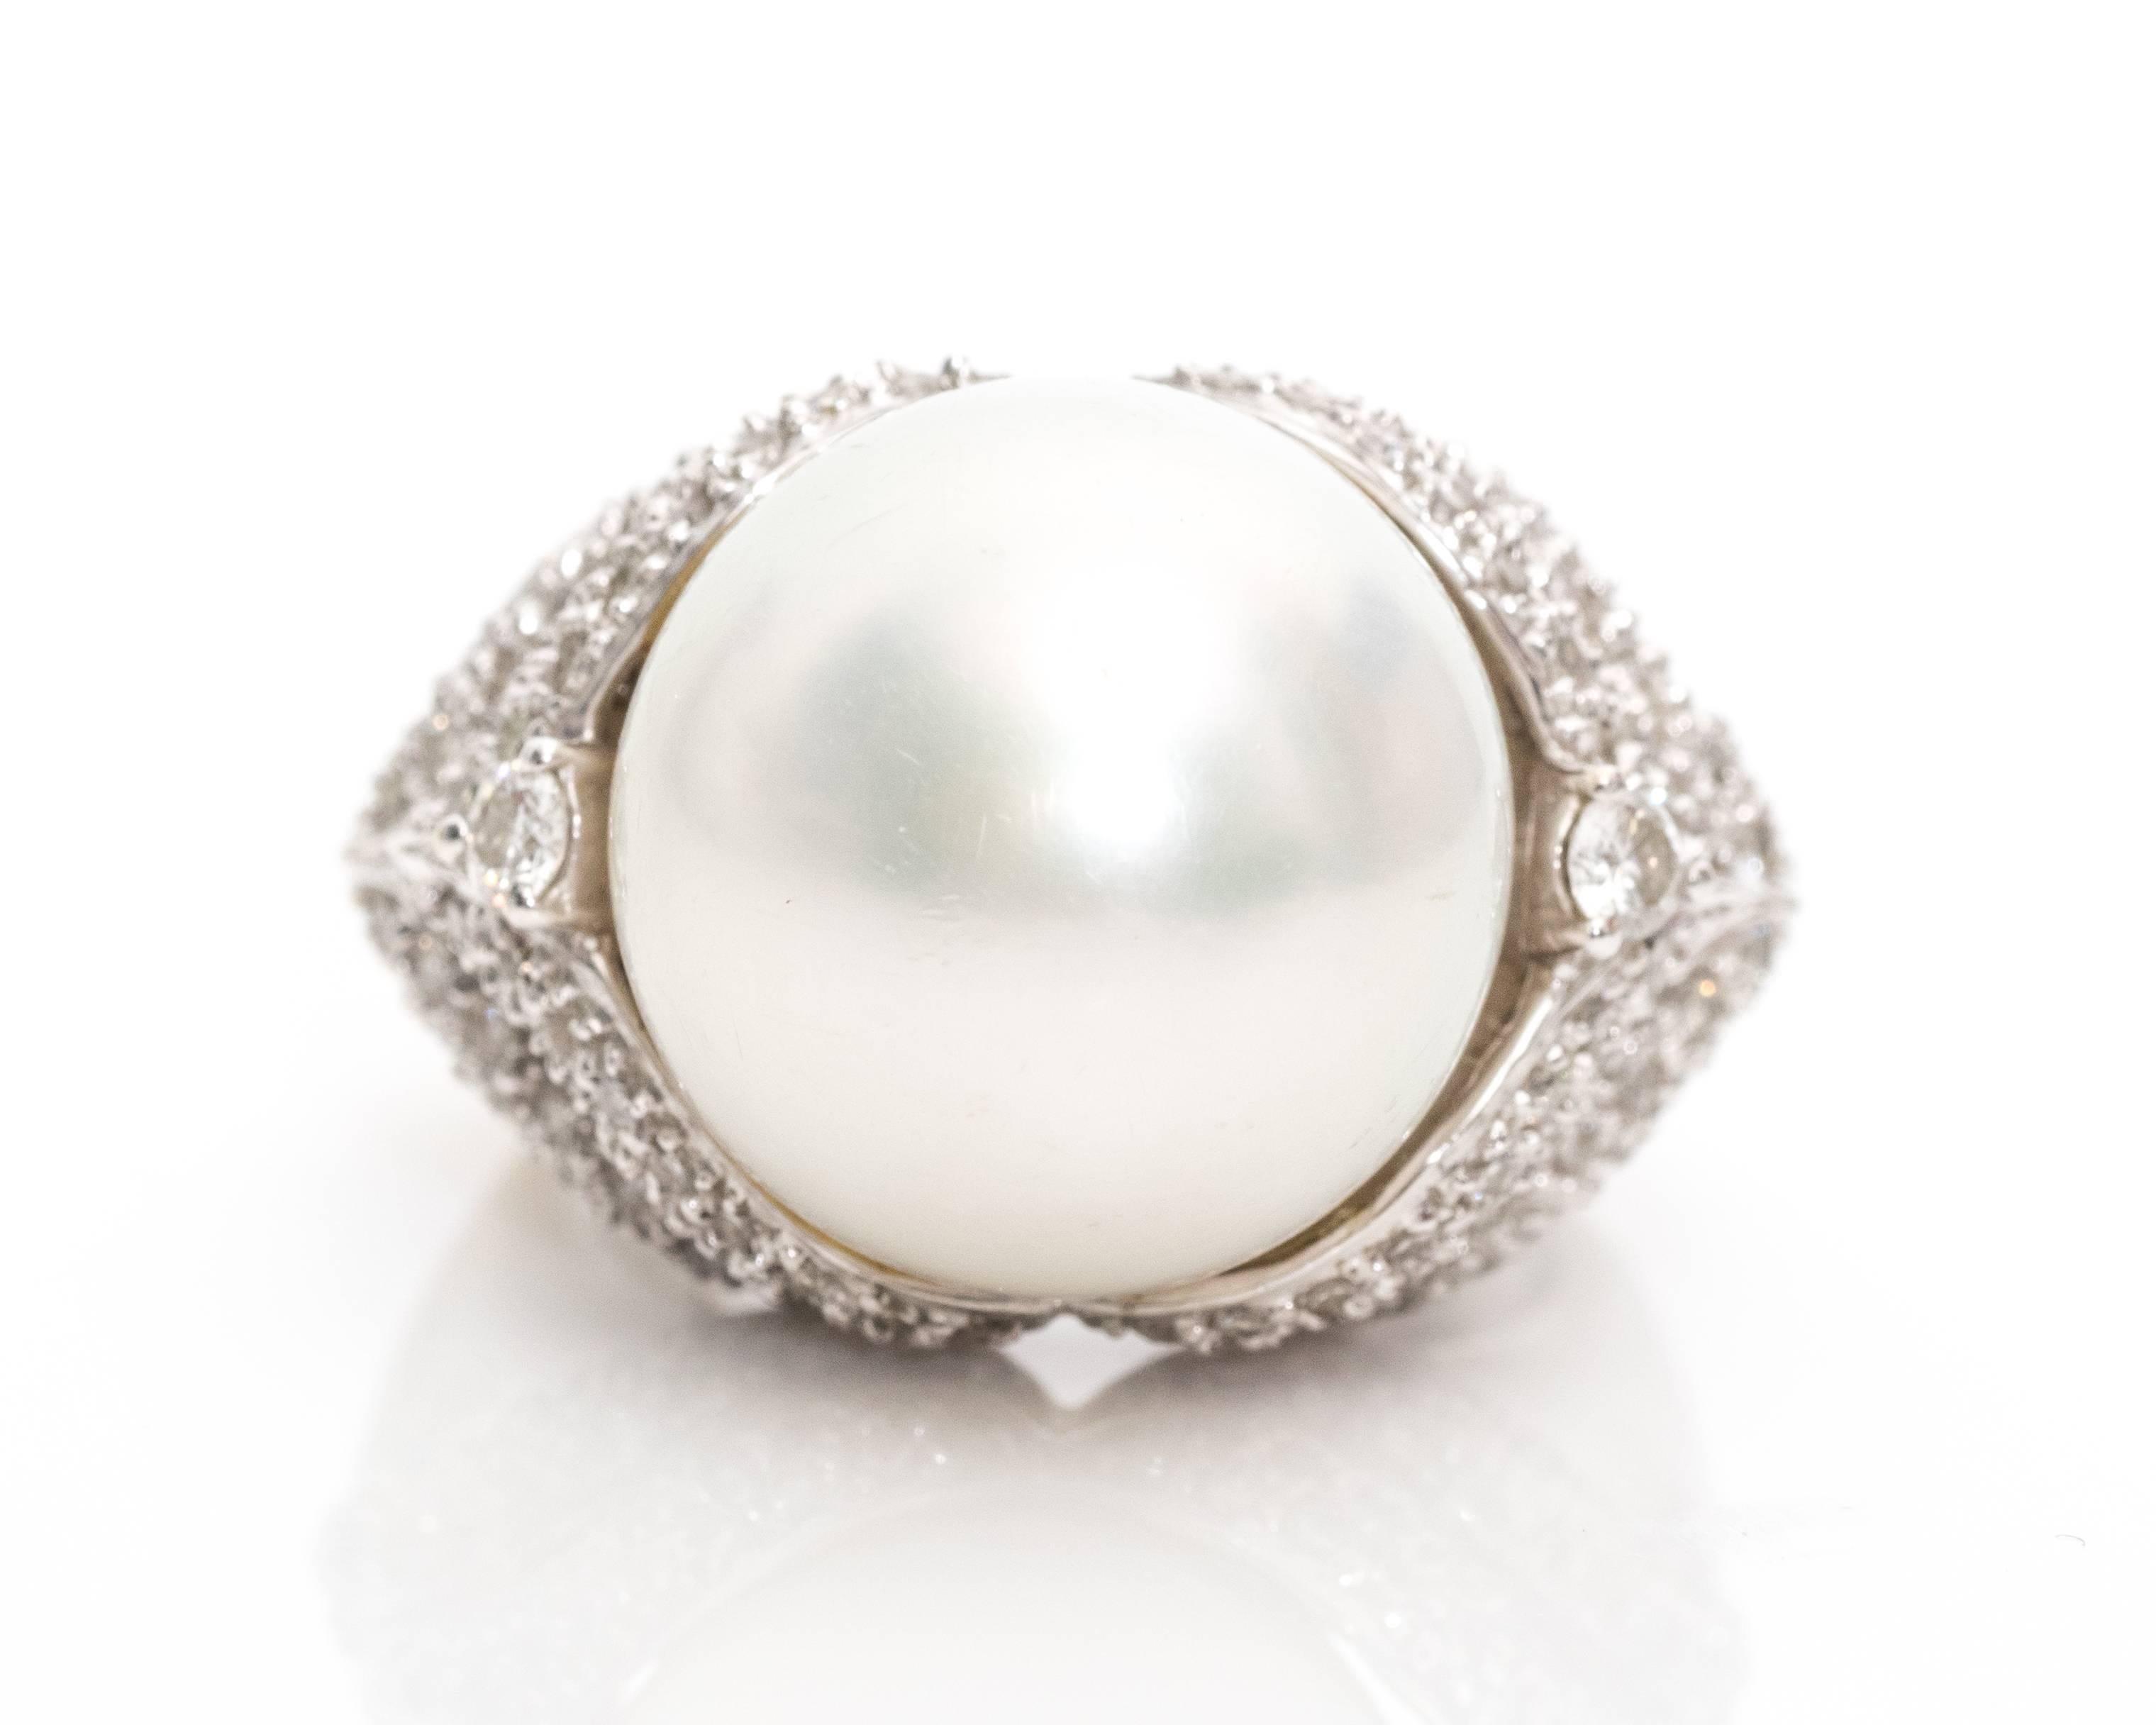 1950s Cultured Pearl, Diamond, and 18 Karat White Gold Cocktail Ring

This retro cocktail ring from the 1950s has a large 15 millimeter cultured pearl in the center. There are two diamonds set in three-prong frames on each side of the pearl, with